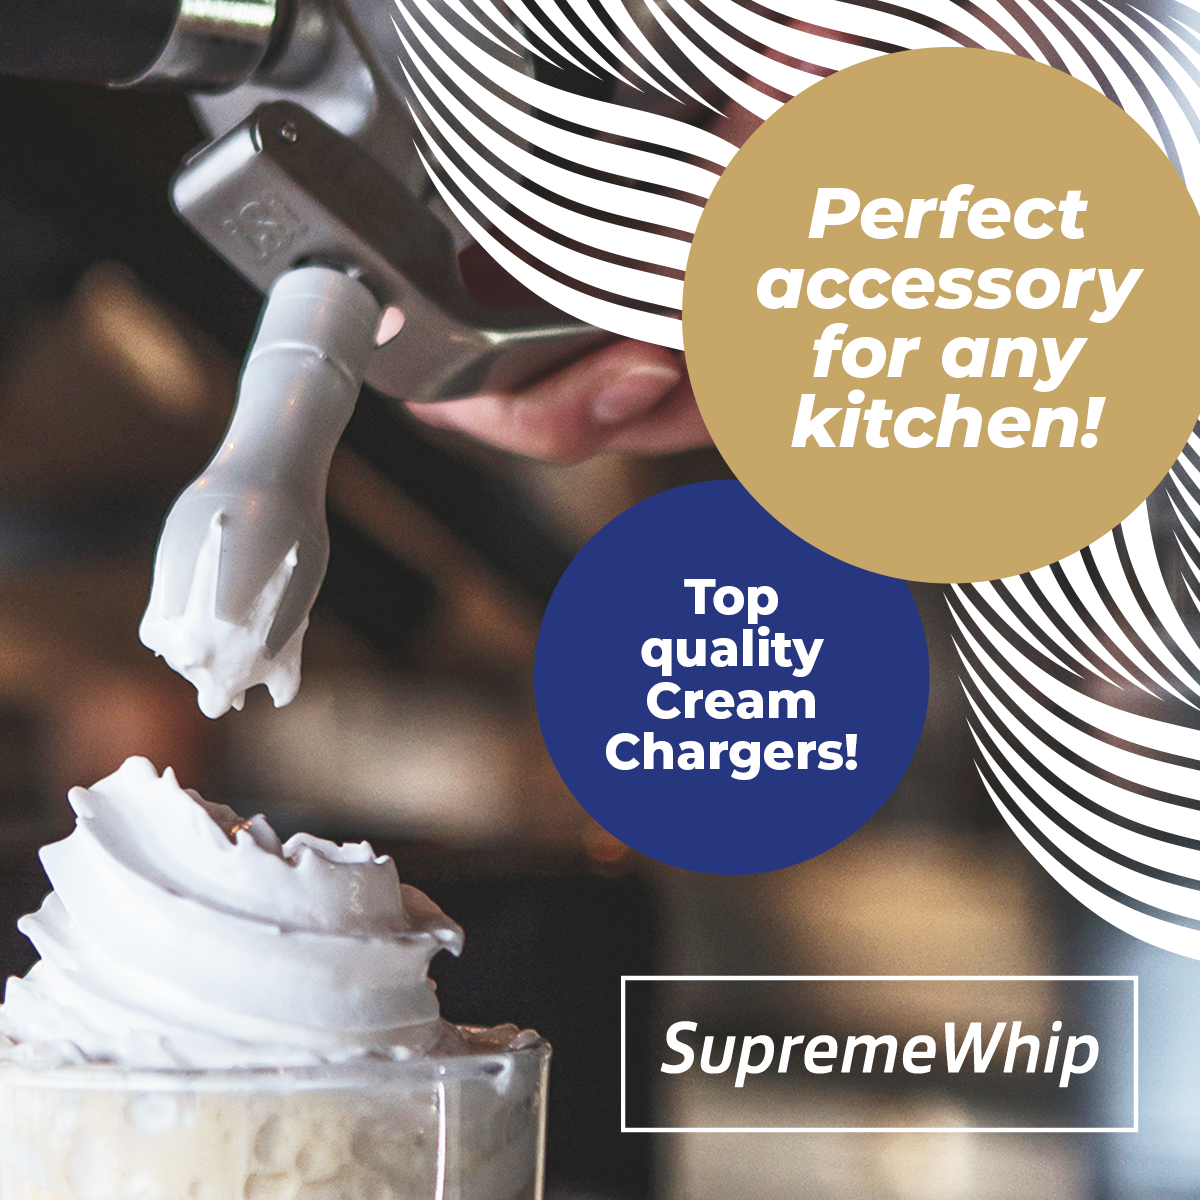 Shop Professional Series Whipped Cream Chargers 8.2g in 50Pks